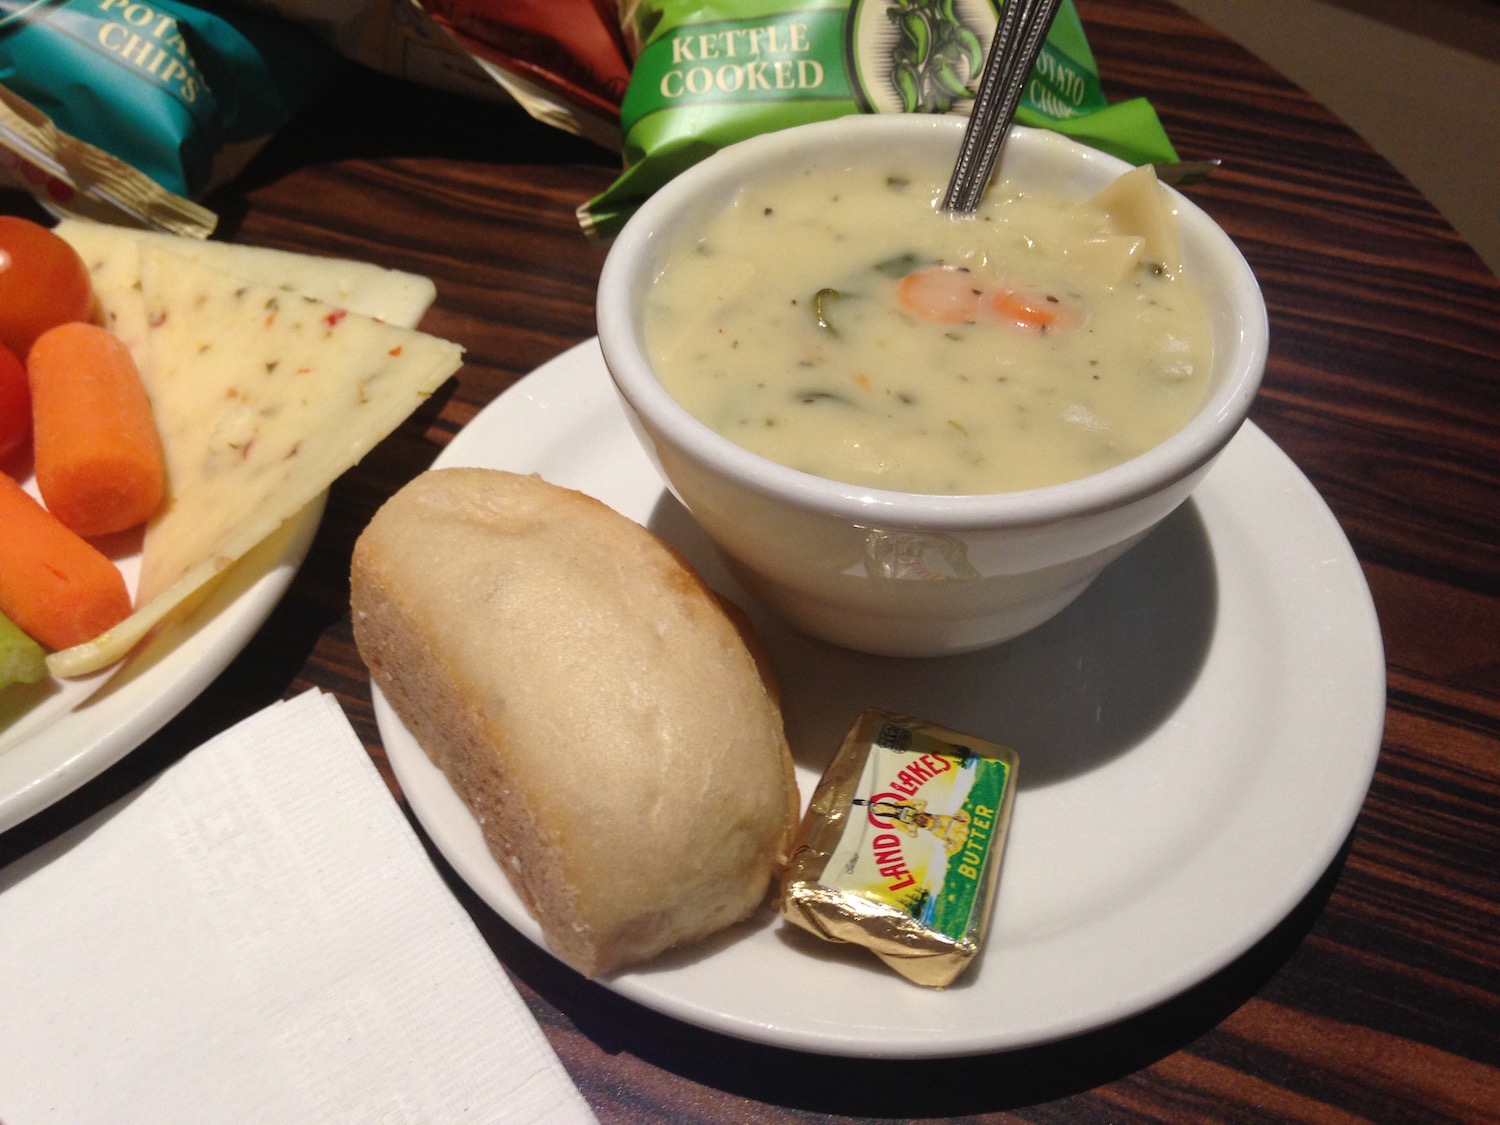 a bowl of soup and bread on a plate